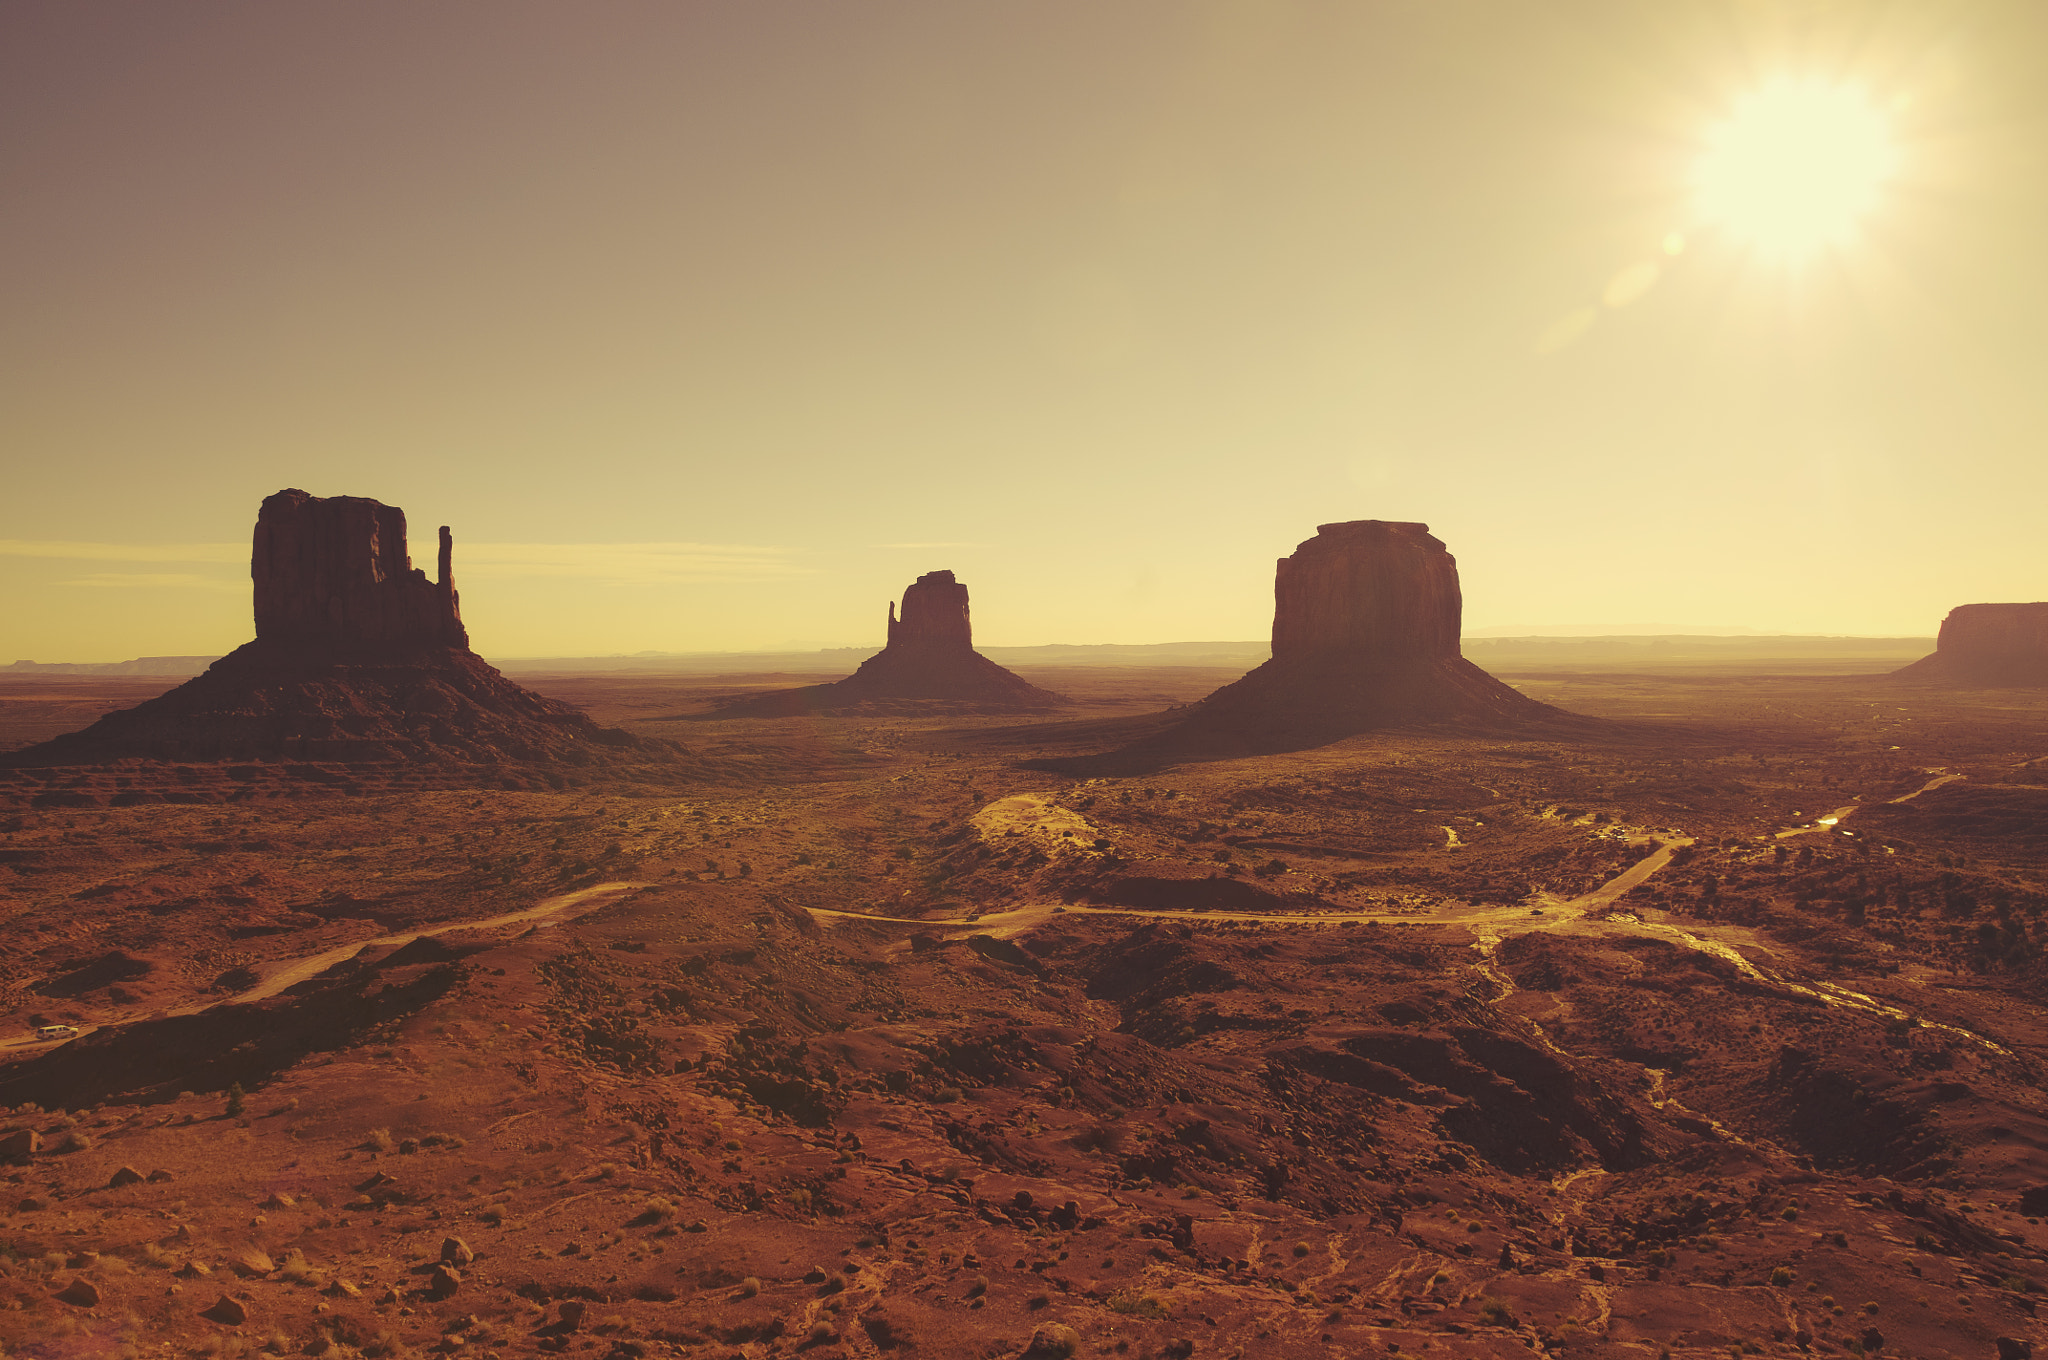 Nikon D300 + Tamron SP AF 17-50mm F2.8 XR Di II VC LD Aspherical (IF) sample photo. Monument valley photography